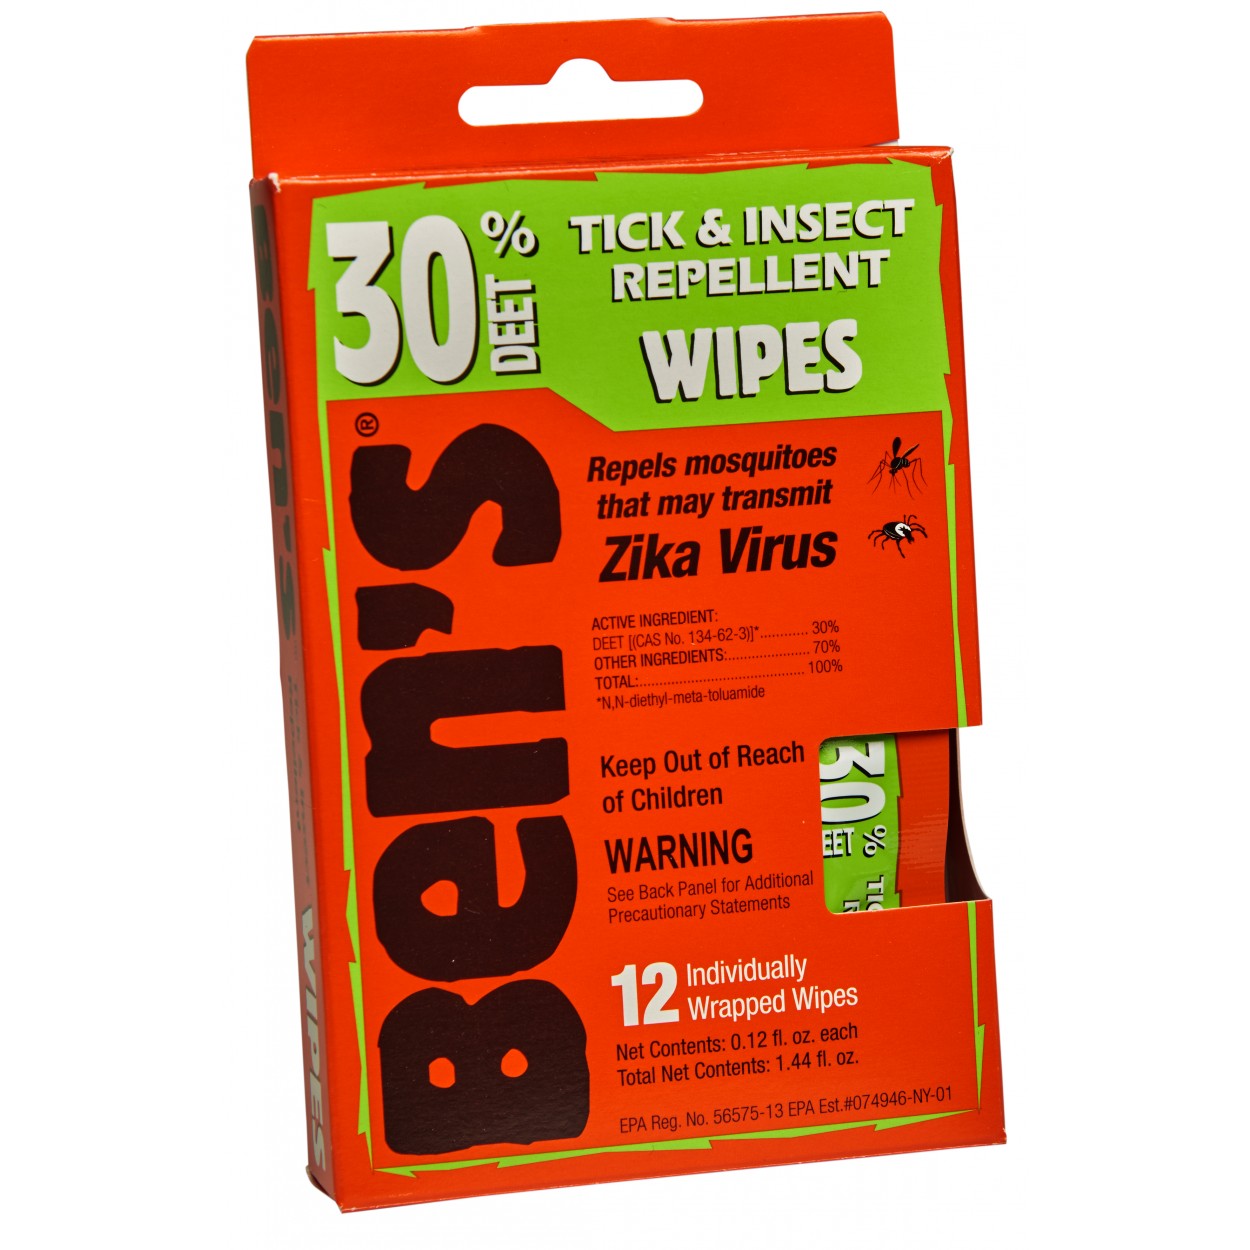 Ben's 30 Tick and Insect Repellent Wipes from GME Supply